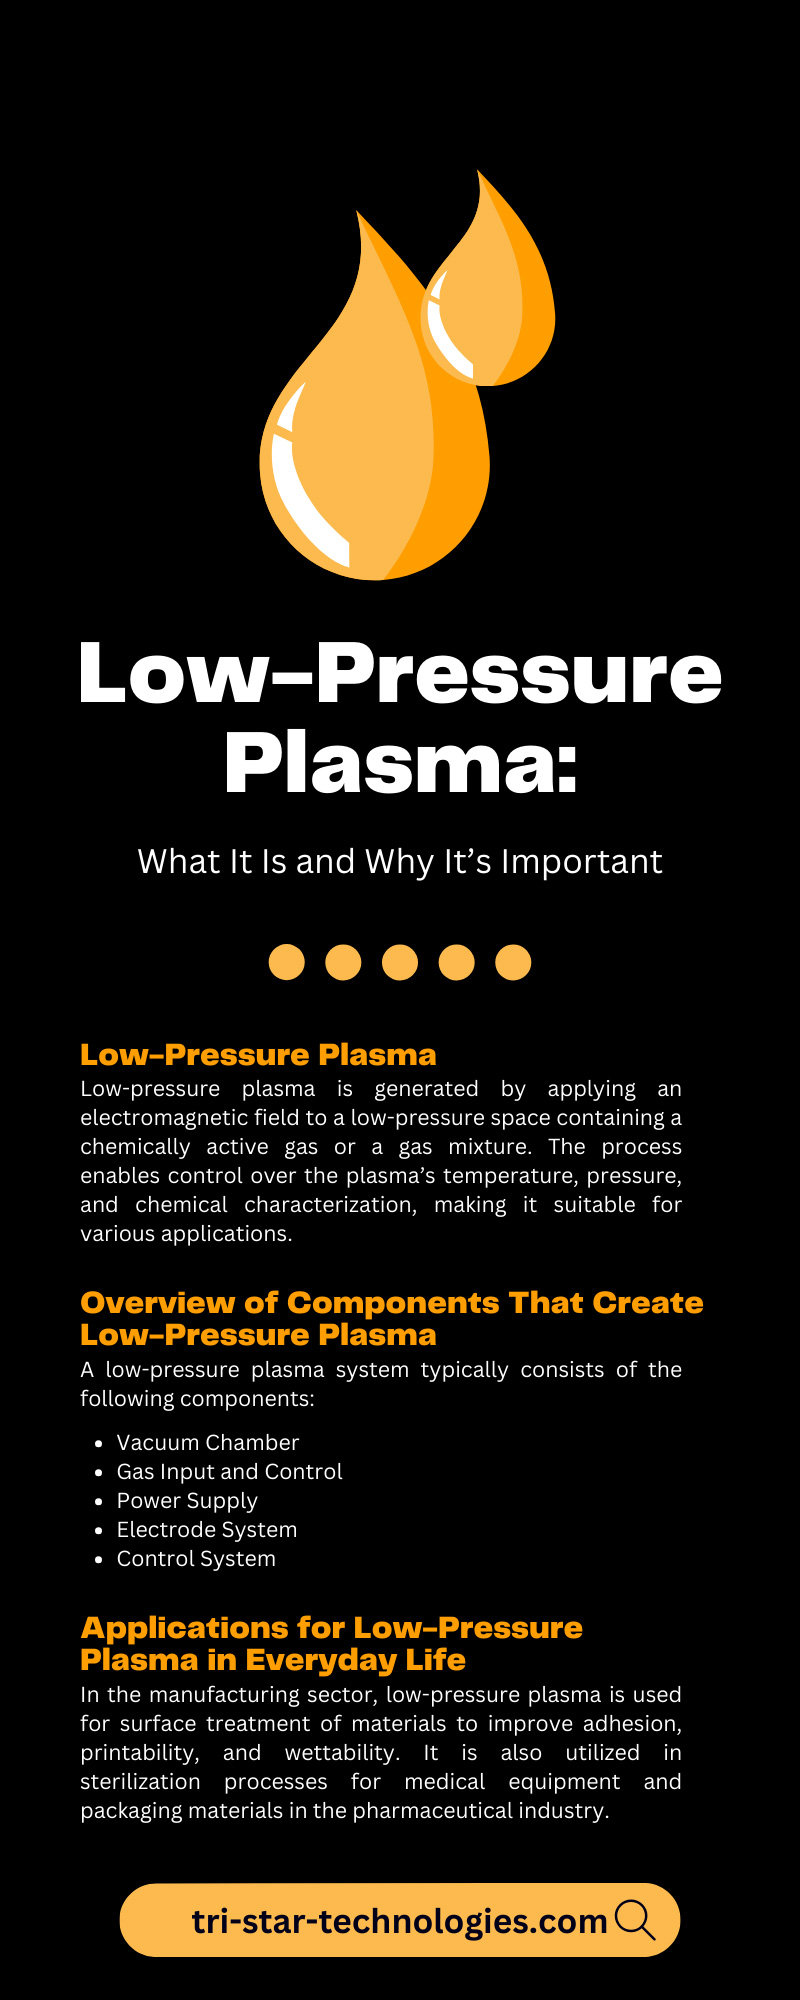 Low-Pressure Plasma: What It Is and Why It’s Important